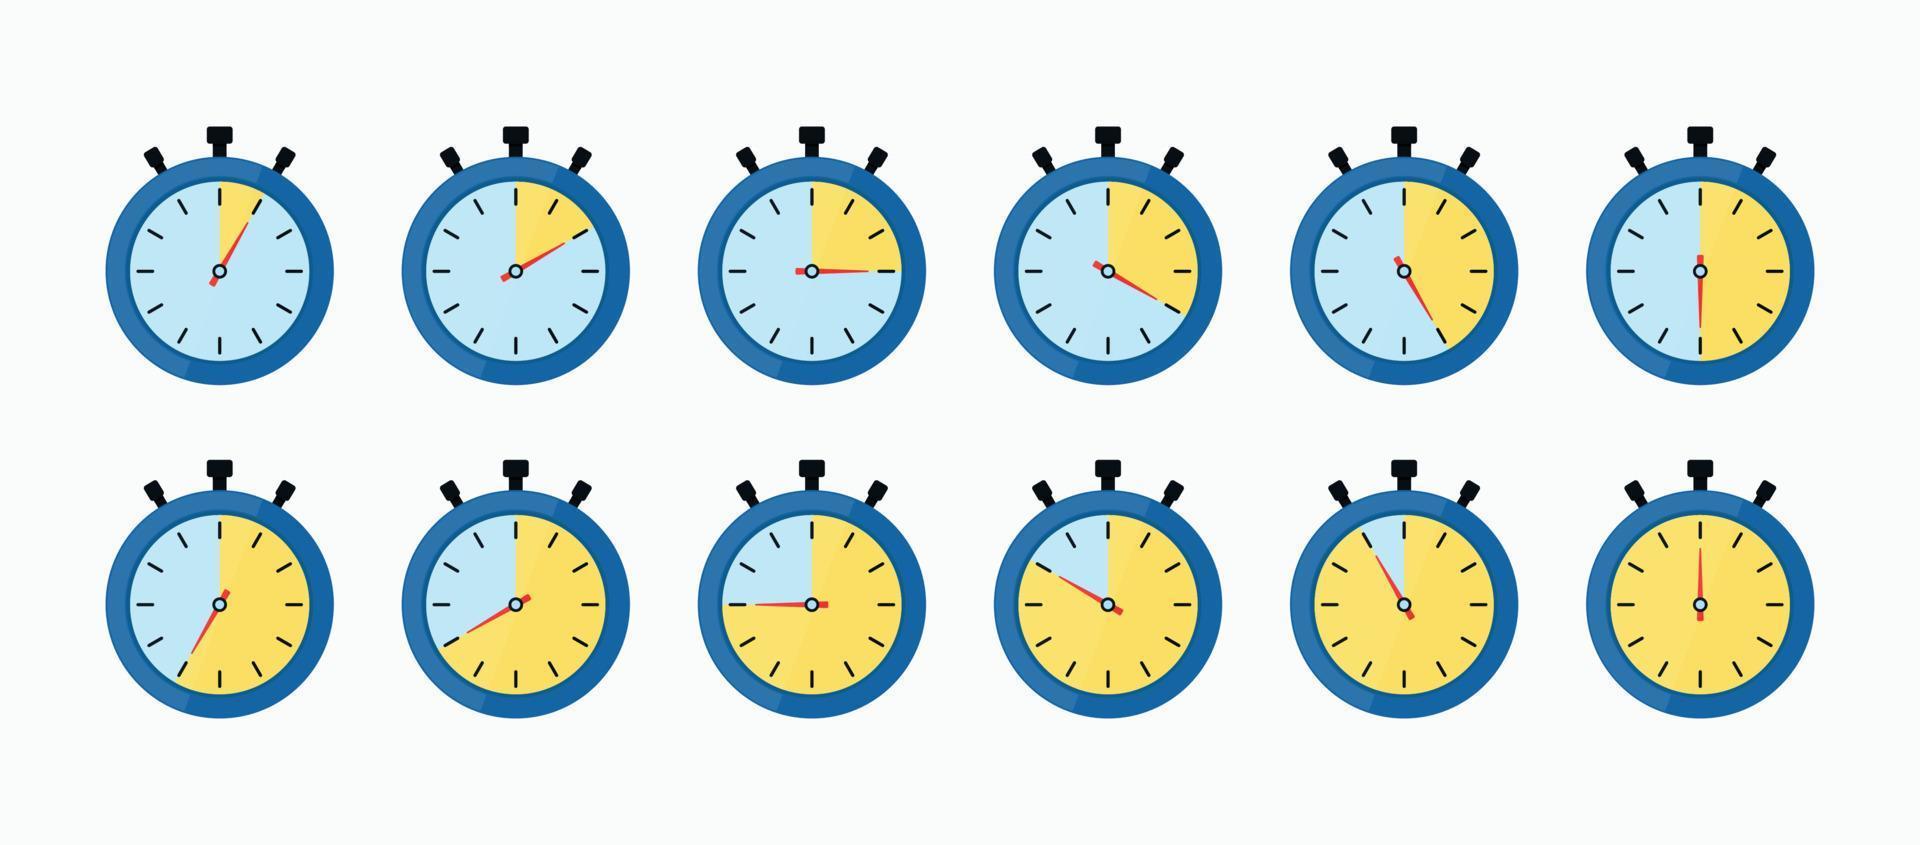 Timer, stopwatch countdown vector illustration